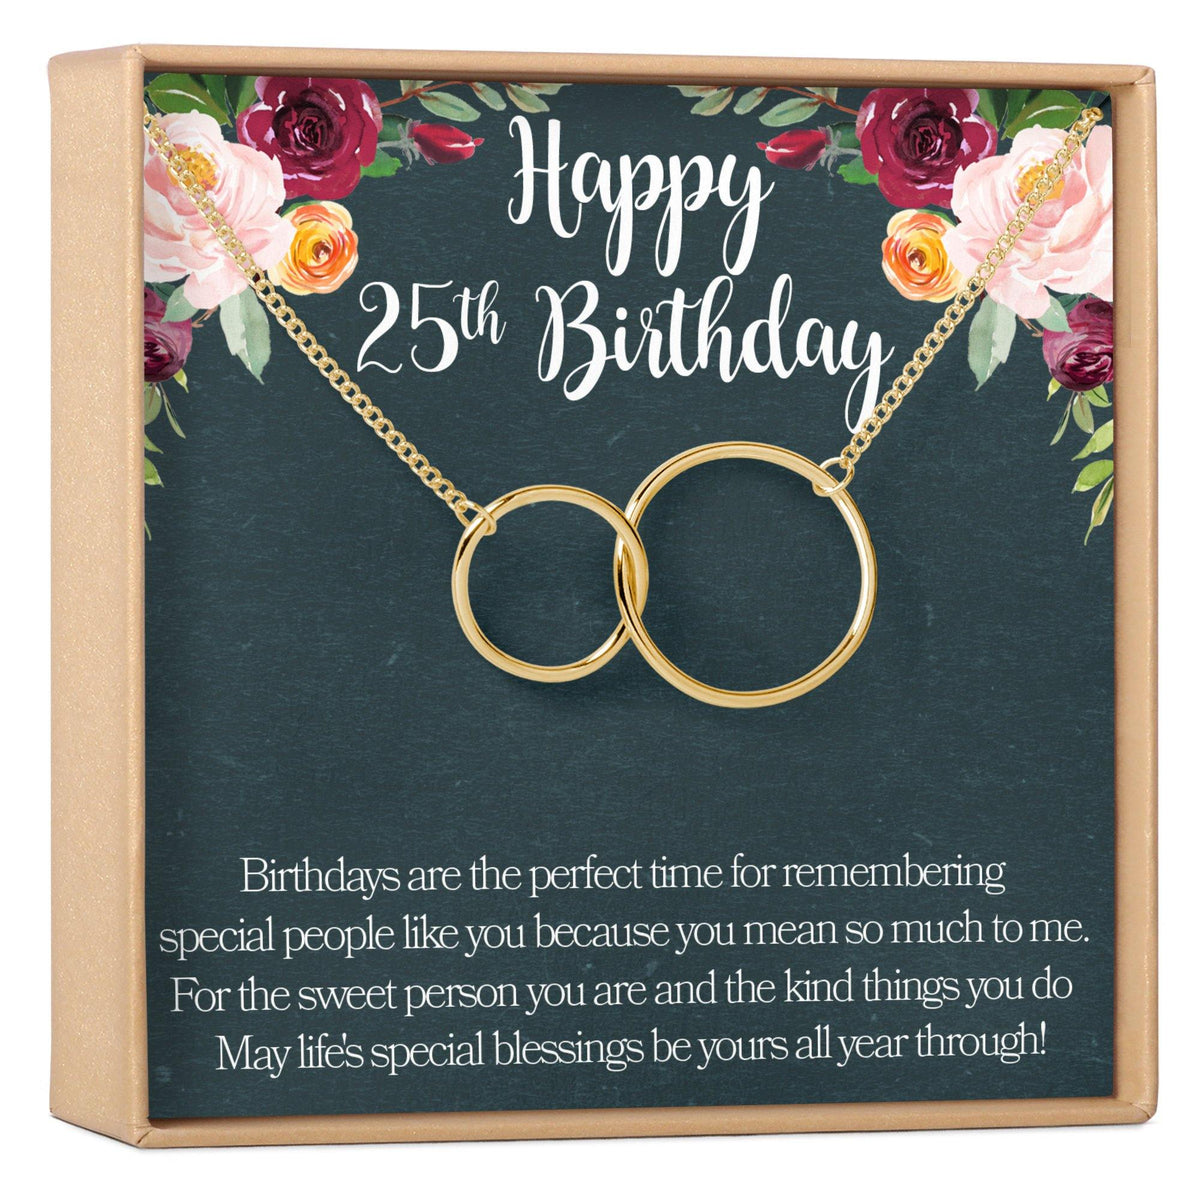 25th Birthday Necklace - Dear Ava, Jewelry / Necklaces / Pendants